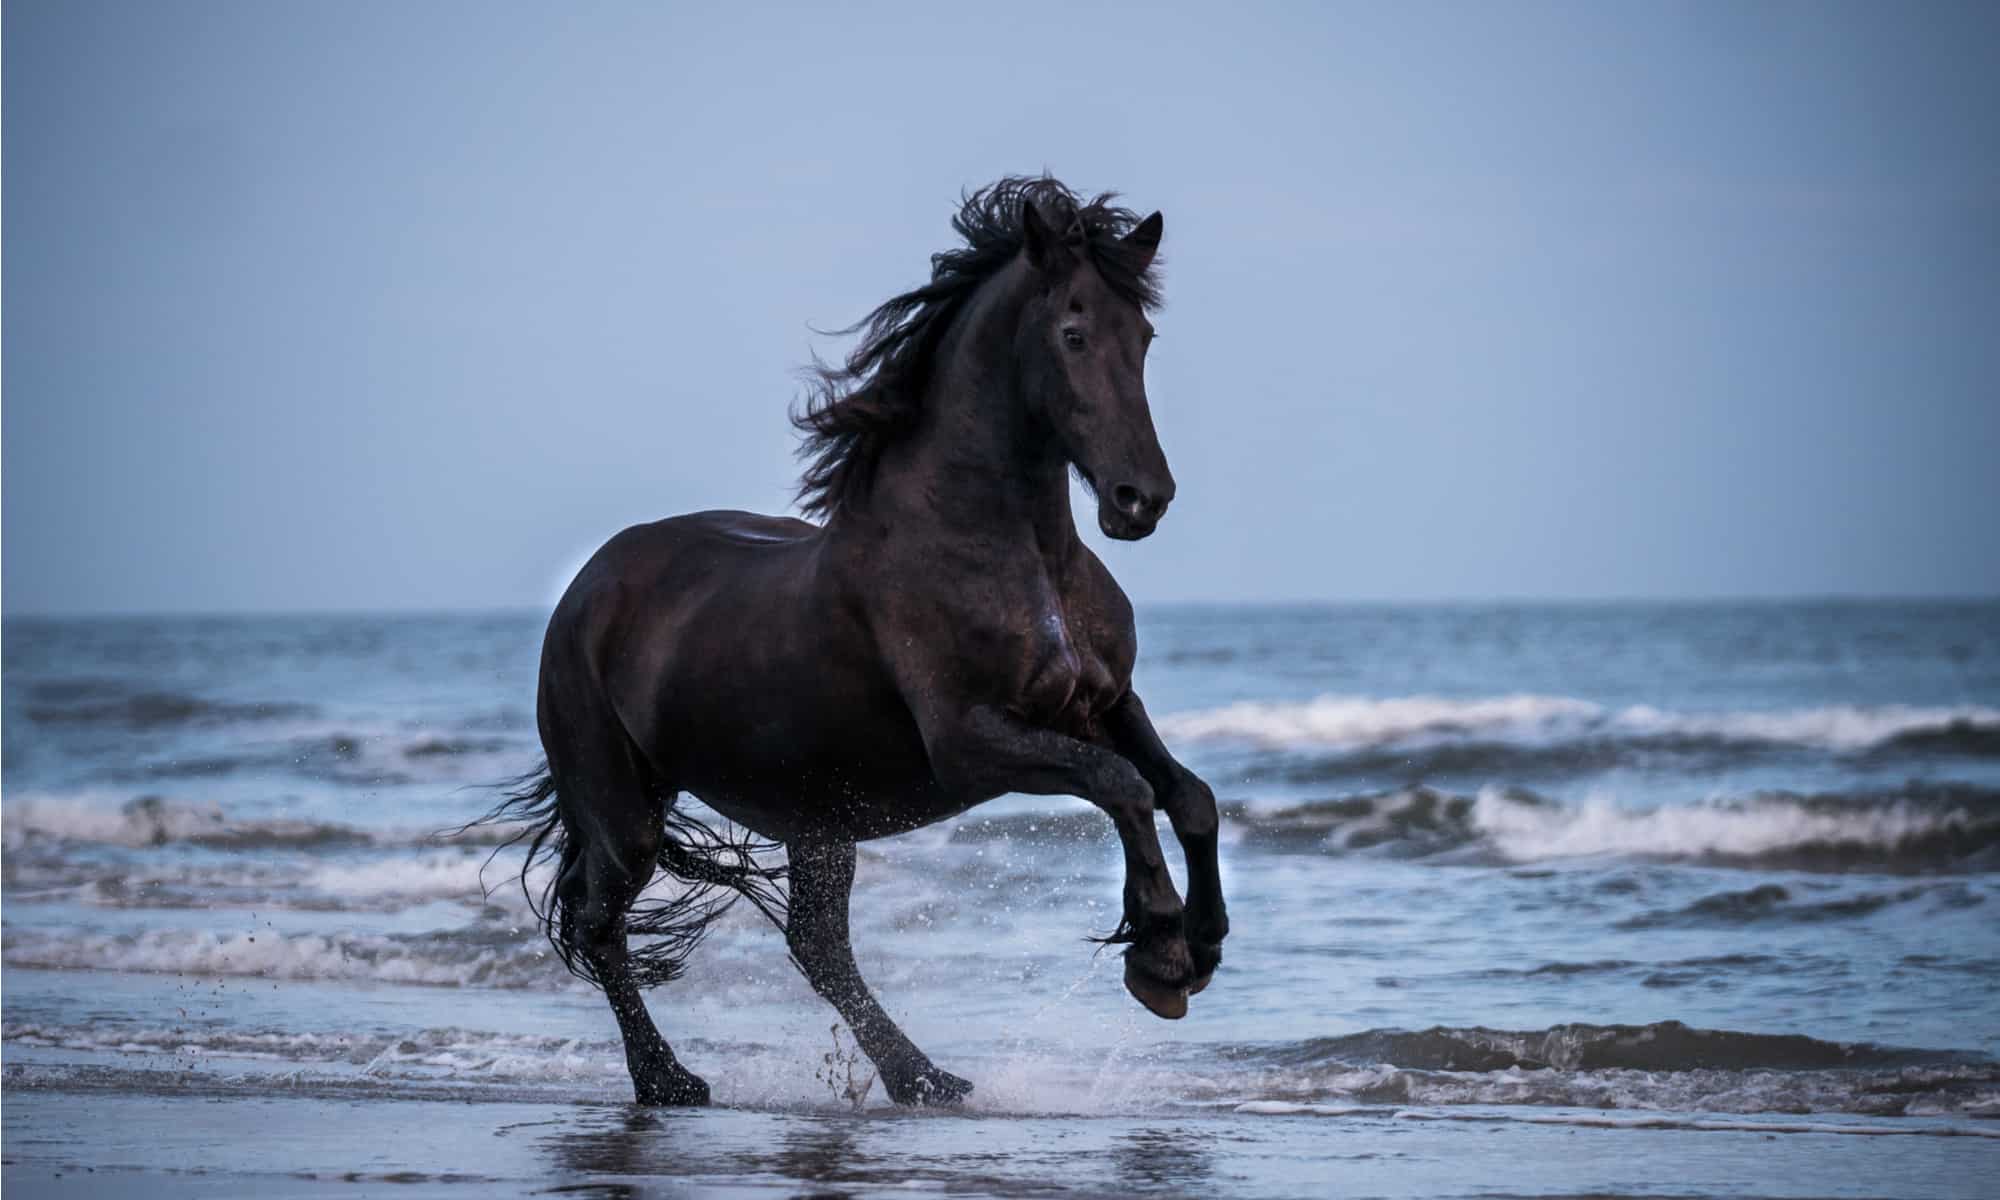 The 200+ Best and Most Creative Black Horse Names - A-Z Animals